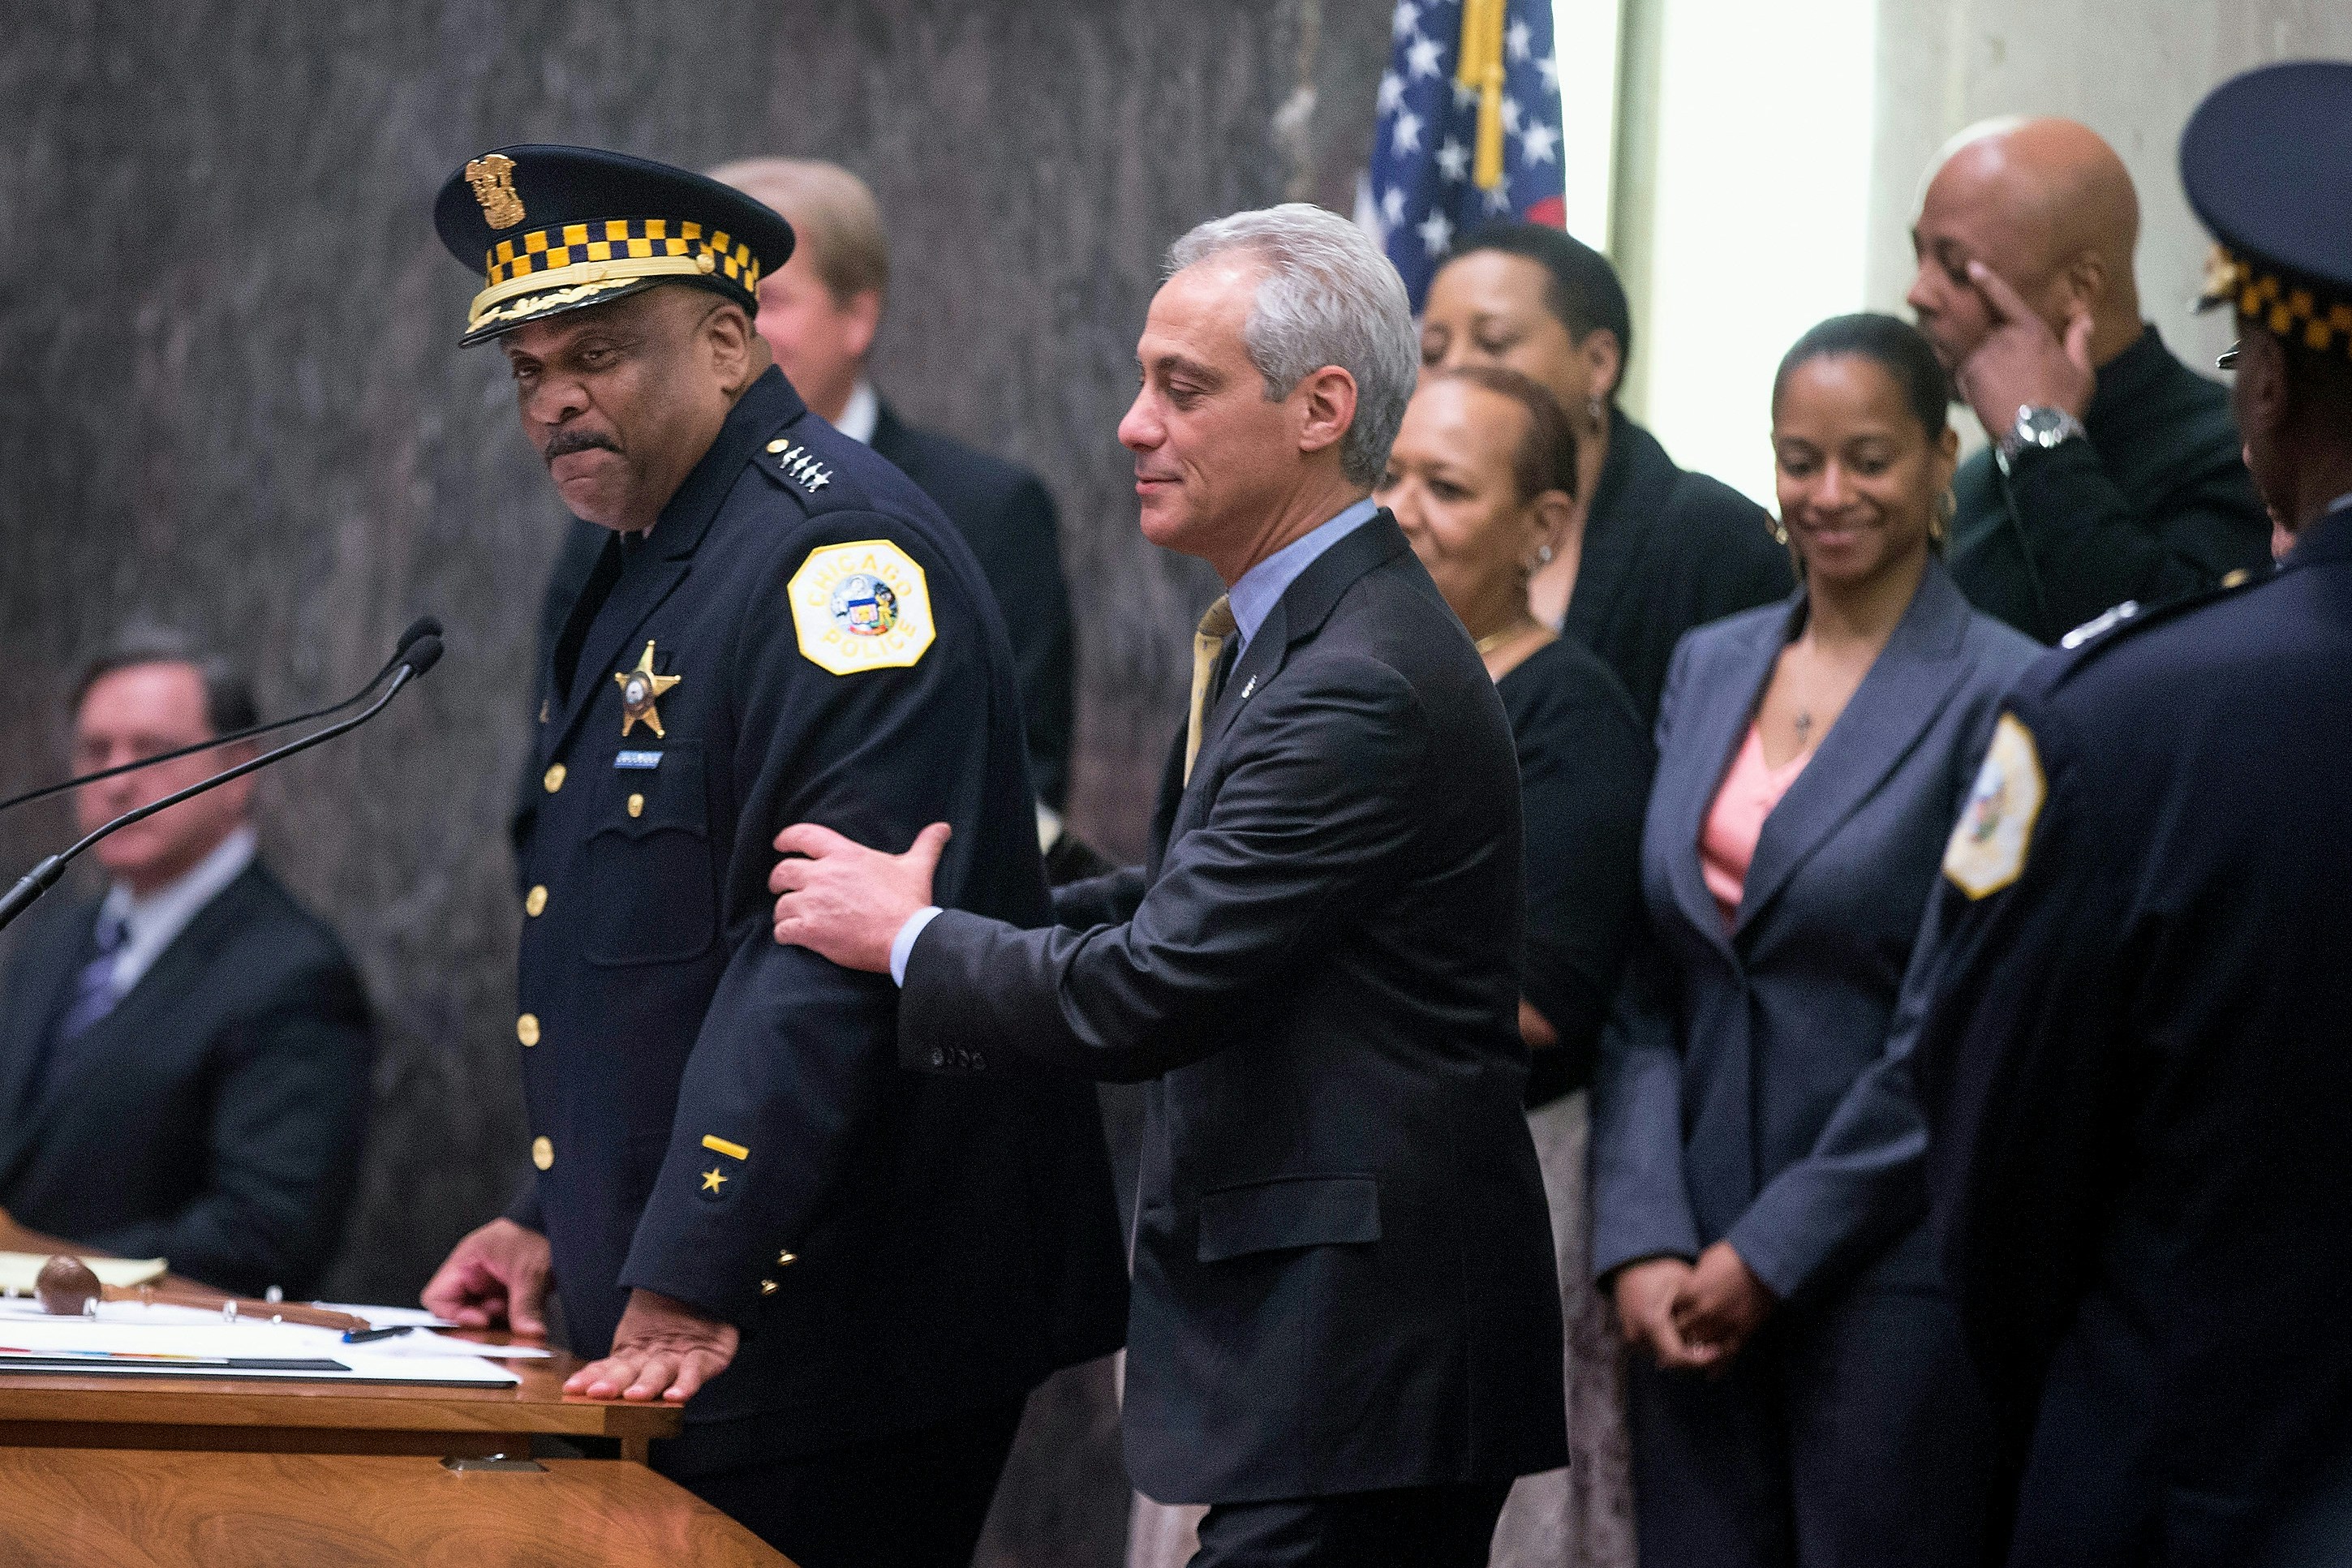 CHICAGO, IL - APRIL 13: Eddie Johnson (L) speaks to the City Council with Mayor Rahm Emanuel (C) by his side after being sworn in as Chicago Police Superintendent on April 13, 2016 in Chicago, Illinois. Johnson had been acting as interim Police Superintendent after some maneuvering by Emanuel who rejected the candidates selected for the job by the Chicago Police Board.  (Photo by Scott Olson/Getty Images)